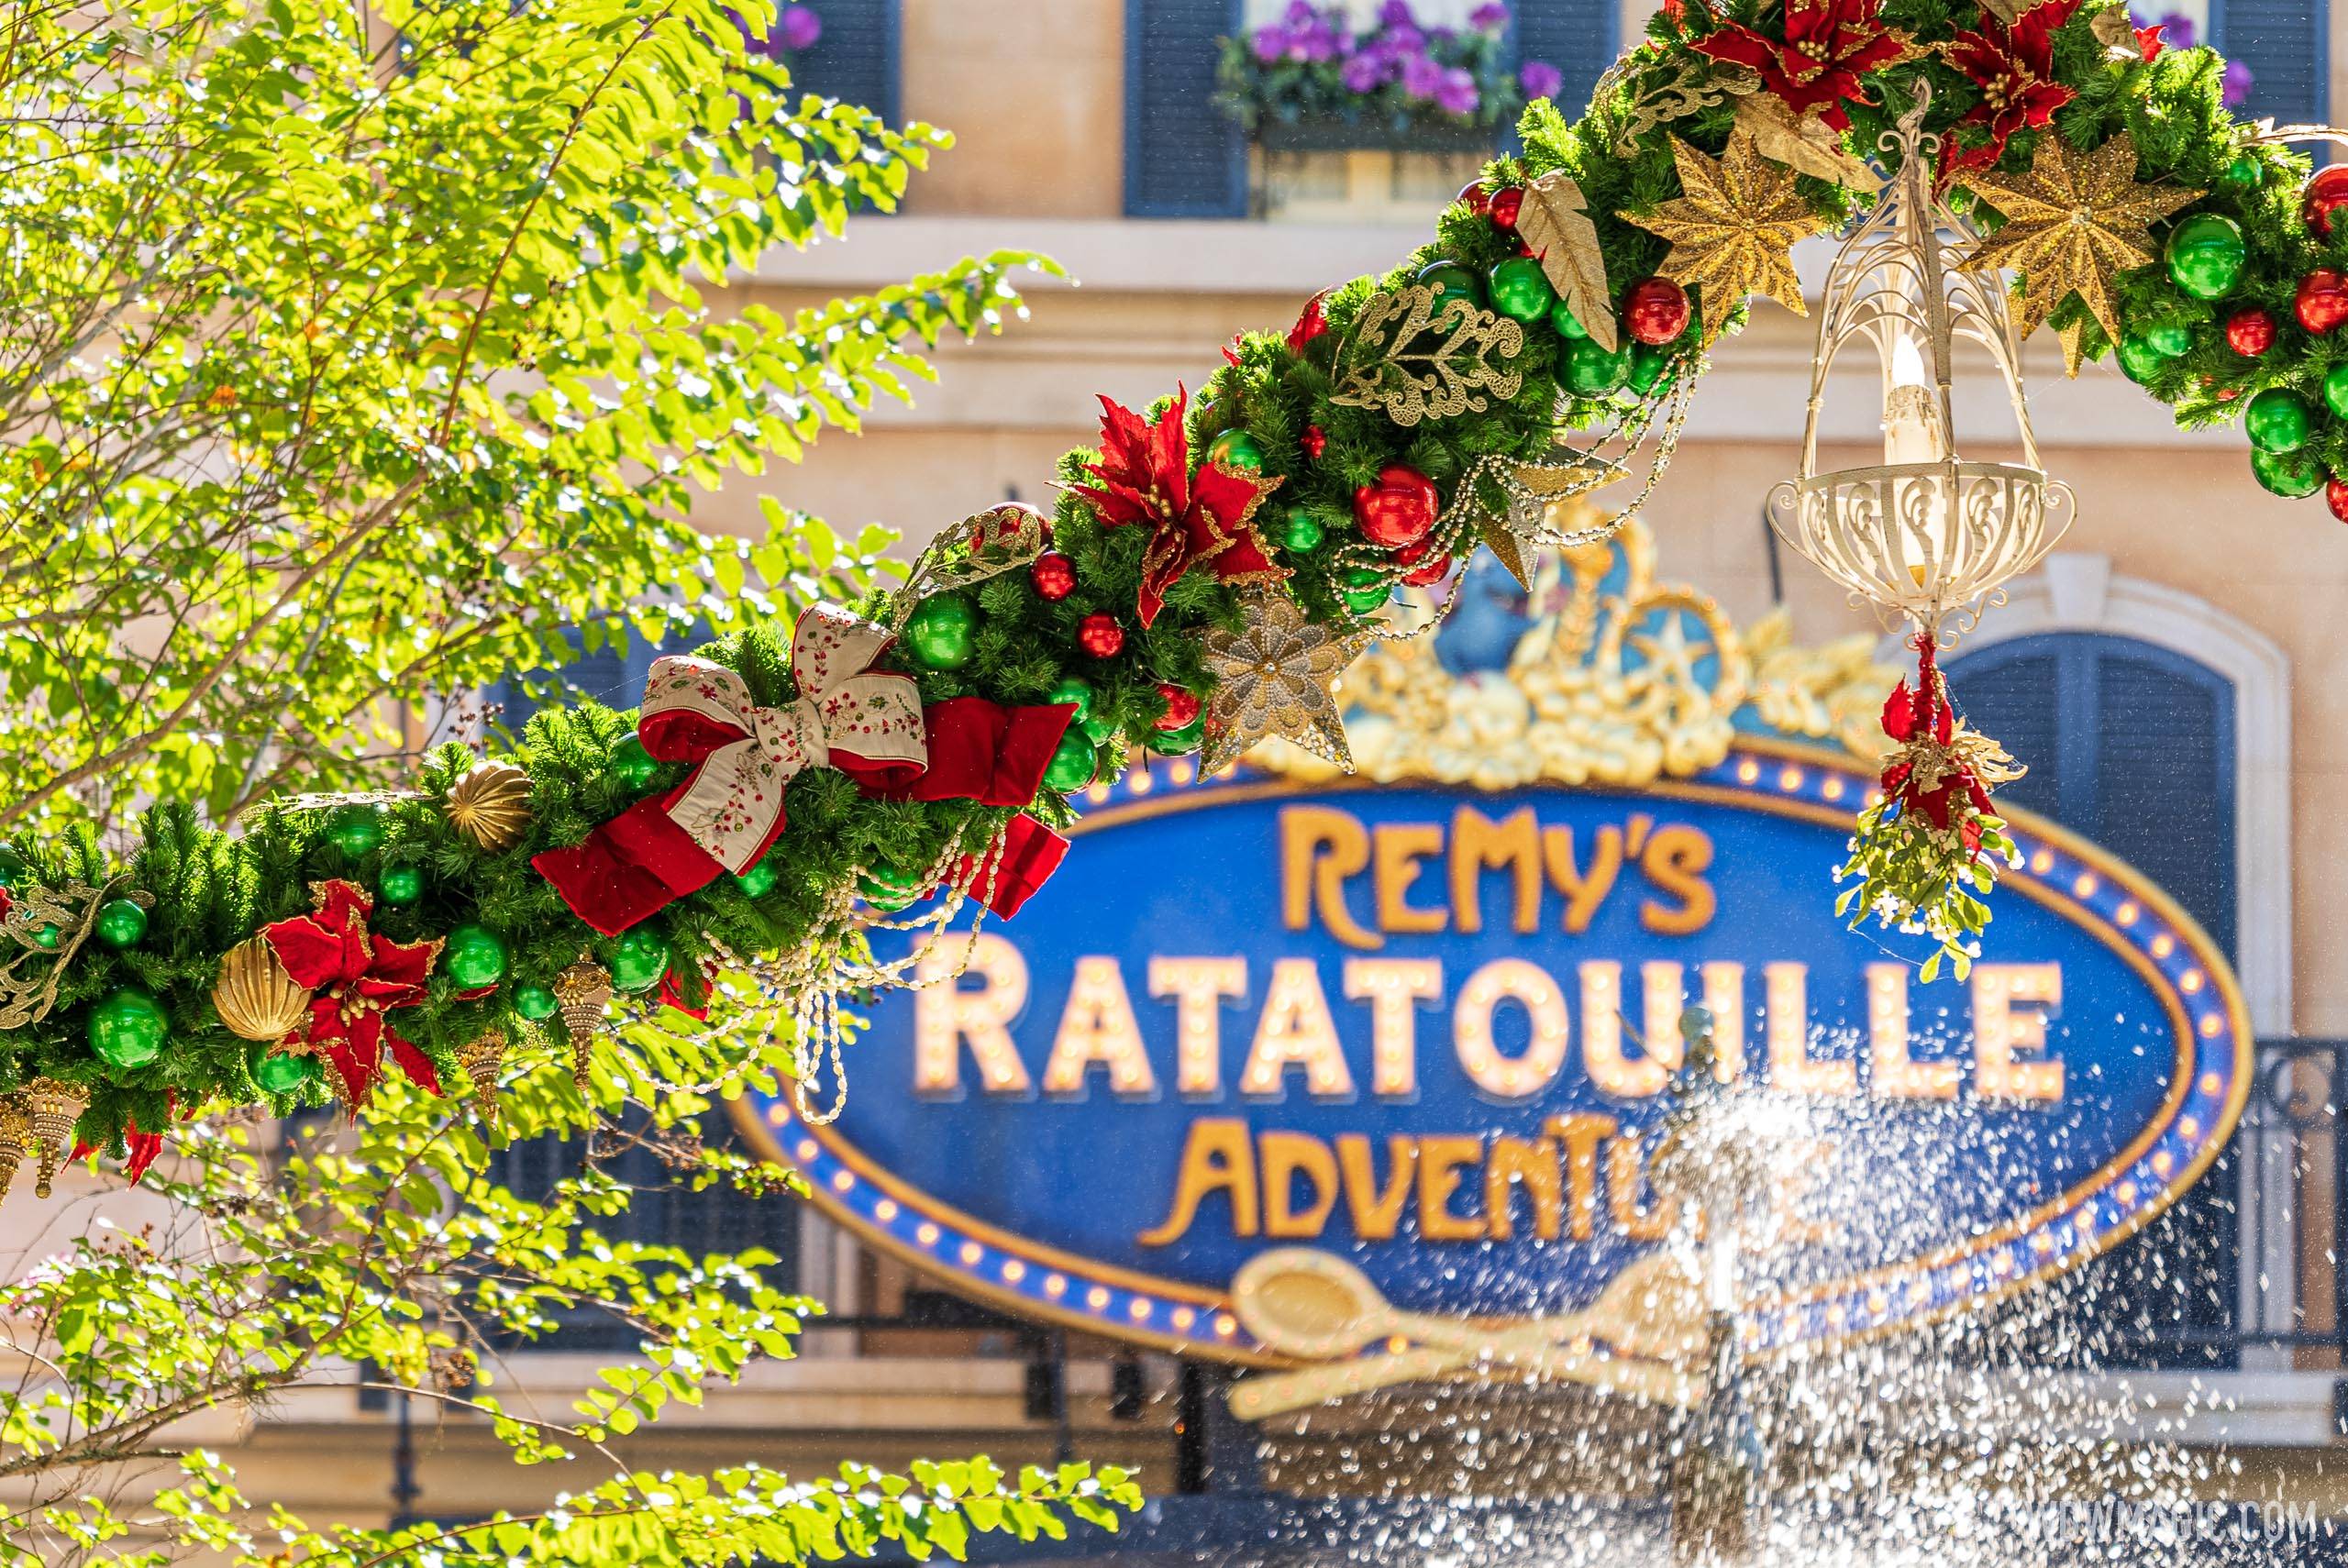 Remy's Ratatouille Adventure is now included in EPCOT's Extended Evening hours